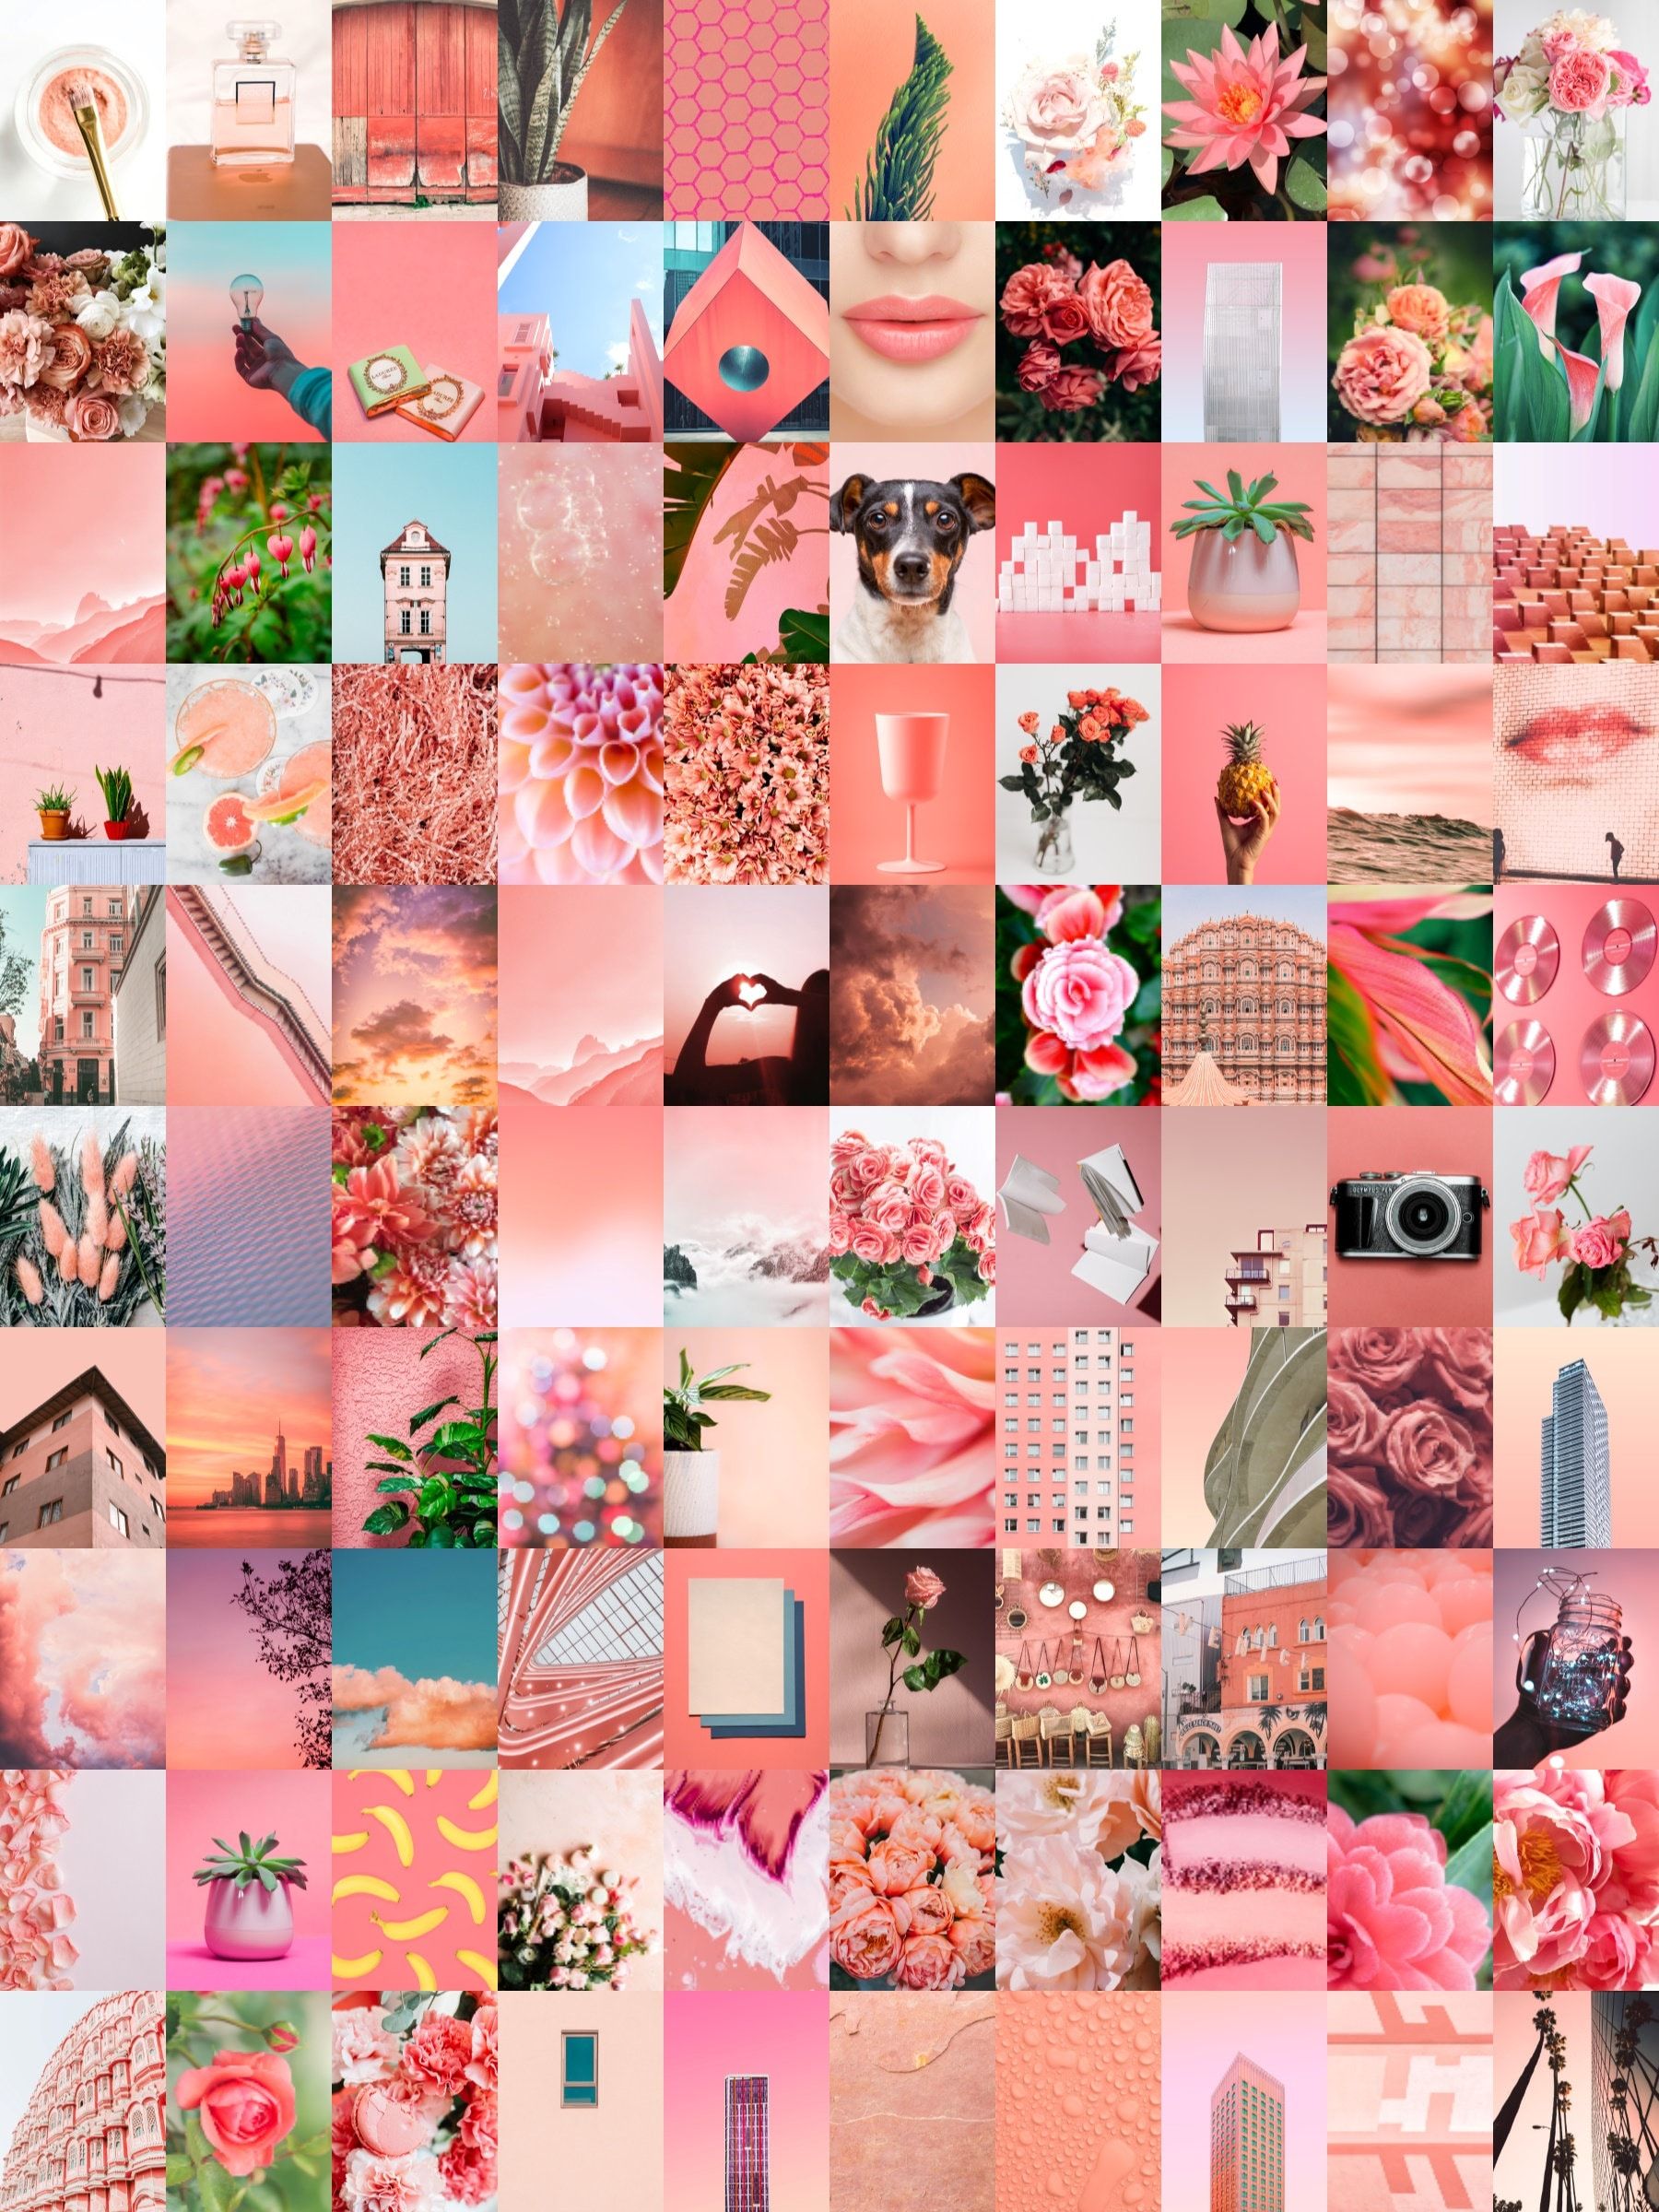 A collage of pictures with pink flowers and other items - Coral, salmon